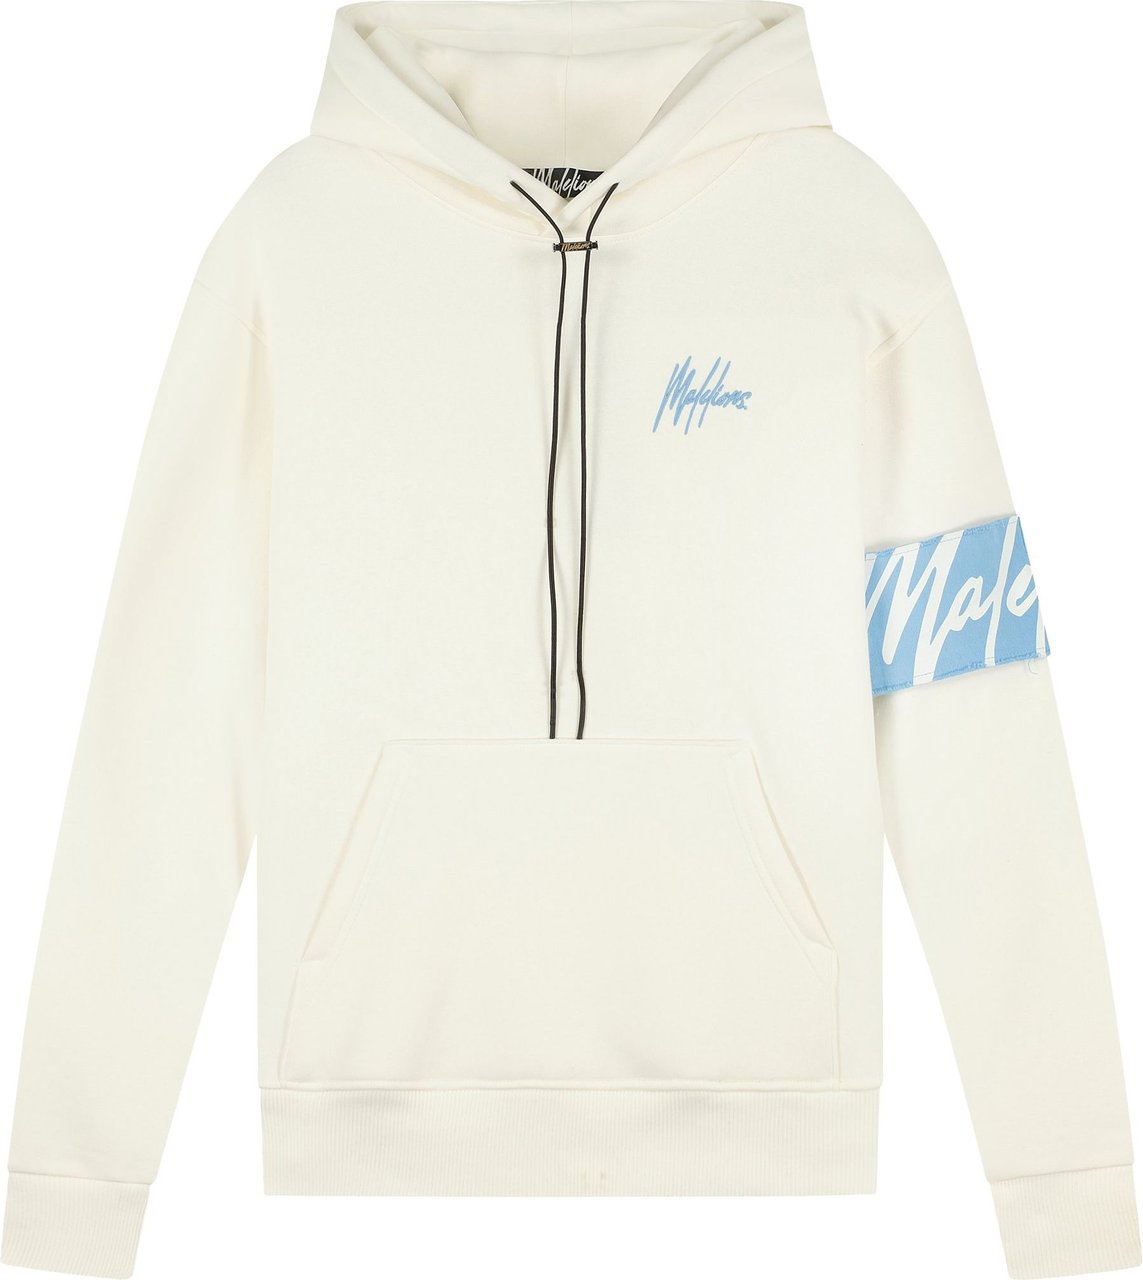 Malelions Men Captain Hoodie - Off-White Wit